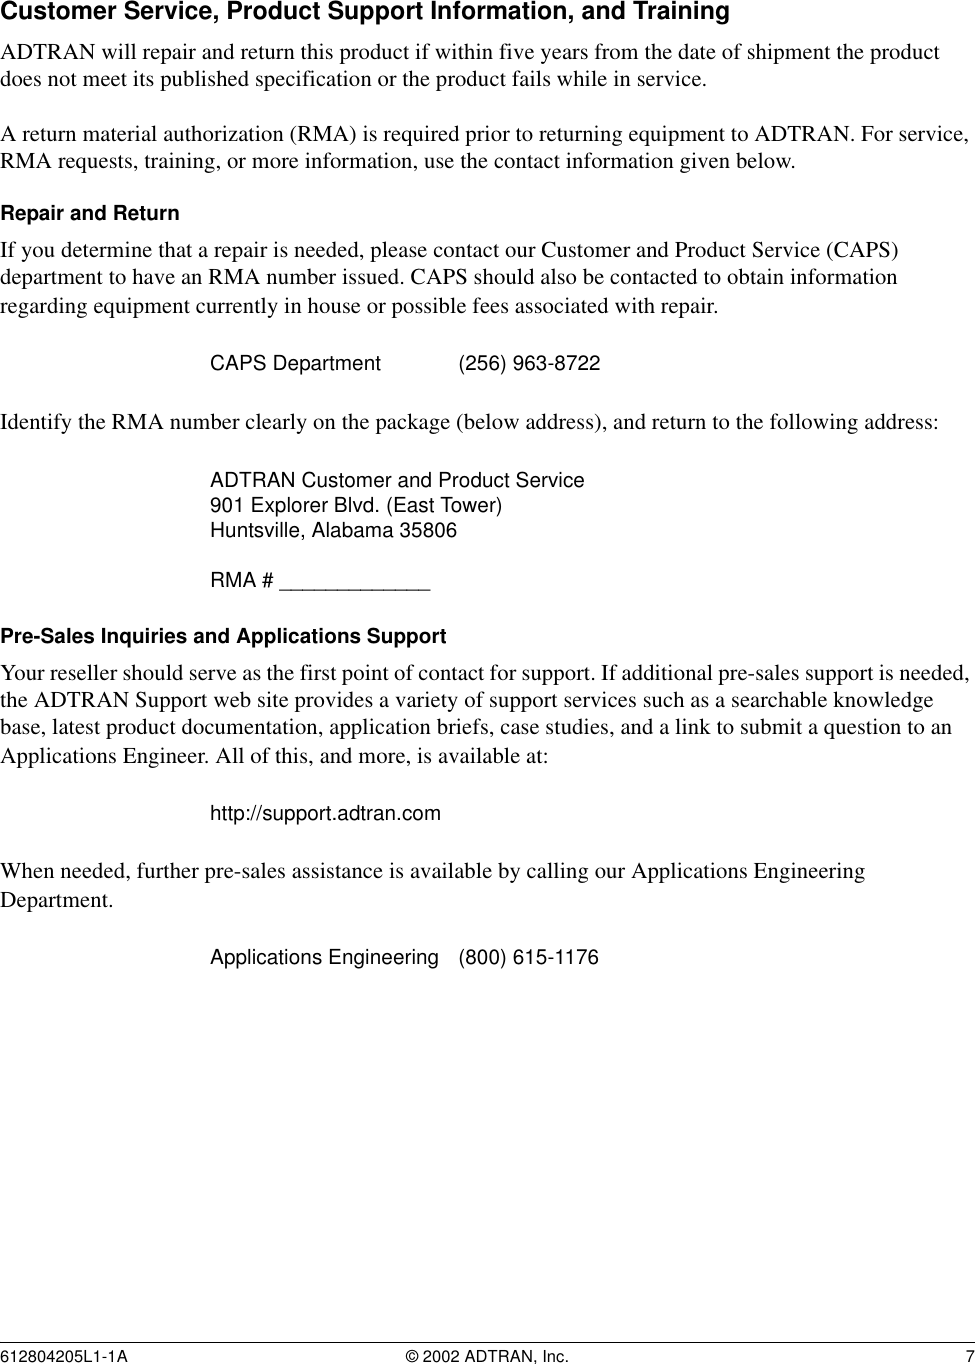 612804205L1-1A © 2002 ADTRAN, Inc. 7Customer Service, Product Support Information, and TrainingADTRAN will repair and return this product if within five years from the date of shipment the product does not meet its published specification or the product fails while in service. A return material authorization (RMA) is required prior to returning equipment to ADTRAN. For service, RMA requests, training, or more information, use the contact information given below.Repair and ReturnIf you determine that a repair is needed, please contact our Customer and Product Service (CAPS) department to have an RMA number issued. CAPS should also be contacted to obtain information regarding equipment currently in house or possible fees associated with repair.Identify the RMA number clearly on the package (below address), and return to the following address:Pre-Sales Inquiries and Applications SupportYour reseller should serve as the first point of contact for support. If additional pre-sales support is needed, the ADTRAN Support web site provides a variety of support services such as a searchable knowledge base, latest product documentation, application briefs, case studies, and a link to submit a question to an Applications Engineer. All of this, and more, is available at:When needed, further pre-sales assistance is available by calling our Applications Engineering Department.CAPS Department (256) 963-8722 ADTRAN Customer and Product Service901 Explorer Blvd. (East Tower)Huntsville, Alabama 35806RMA # _____________http://support.adtran.comApplications Engineering (800) 615-1176 